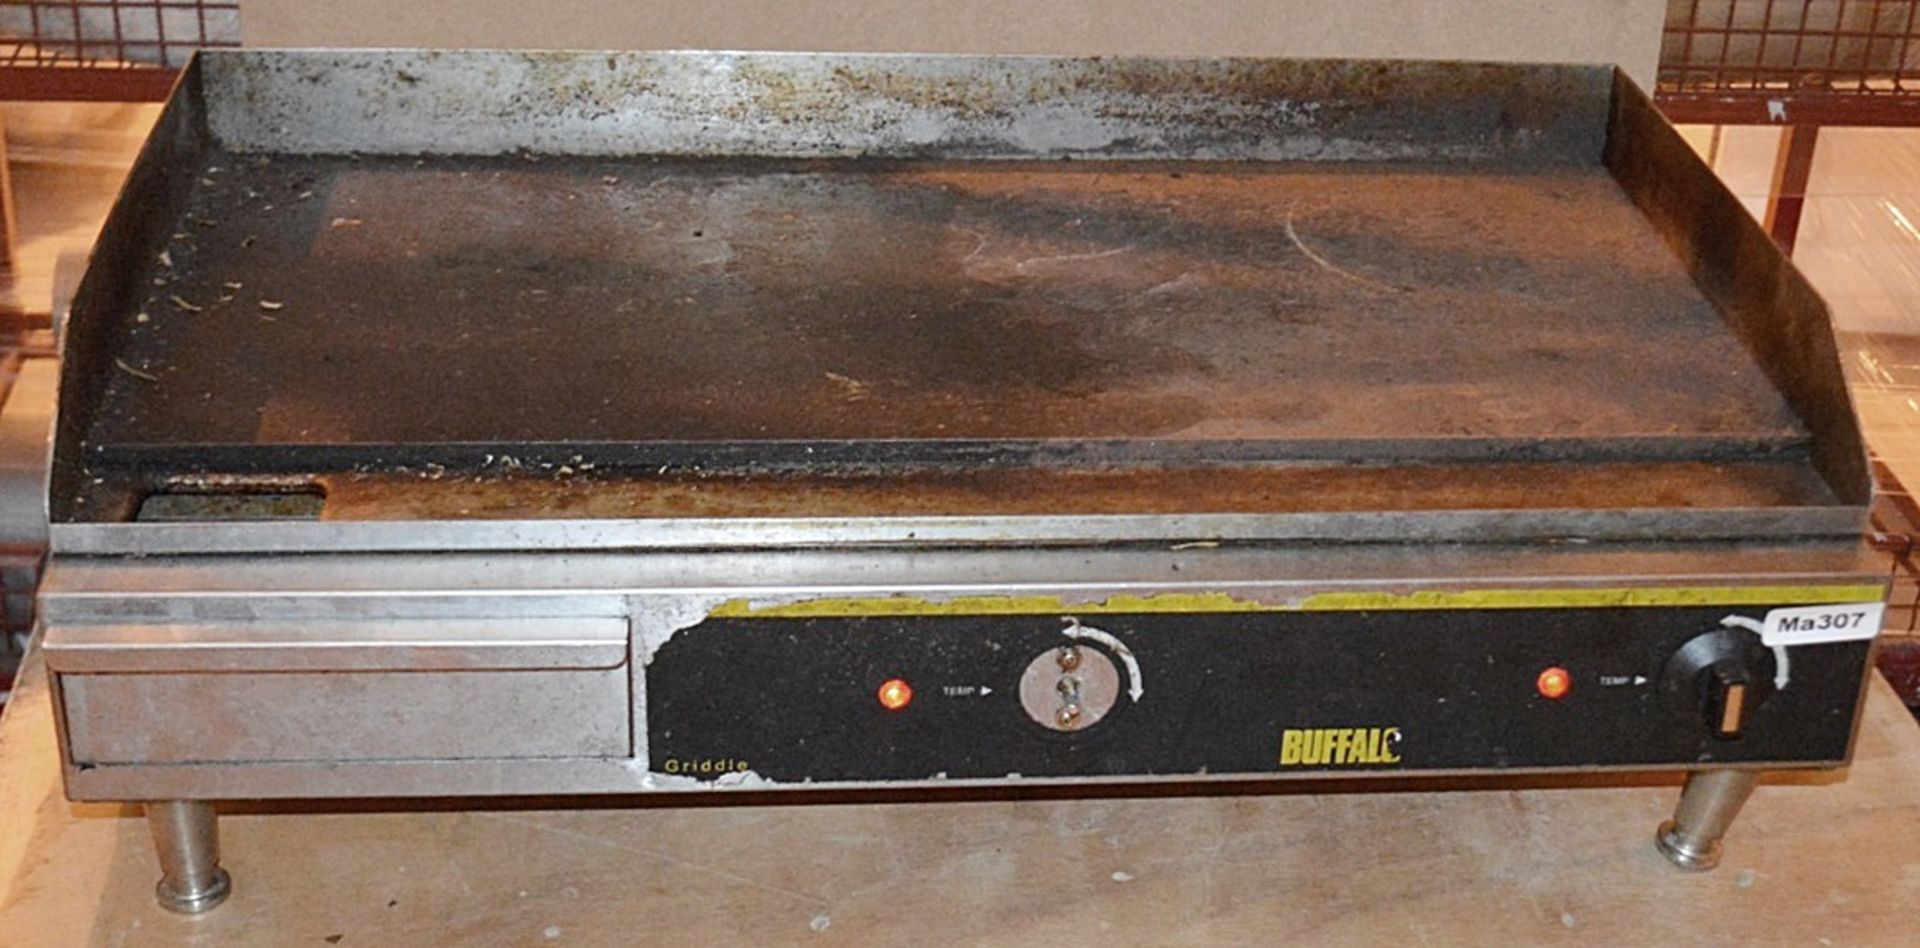 1 x Buffalo G791 Extra Wide Countertop Griddle - Dimensions: 241(H) x 742(W) x 462(D)mm - Used,